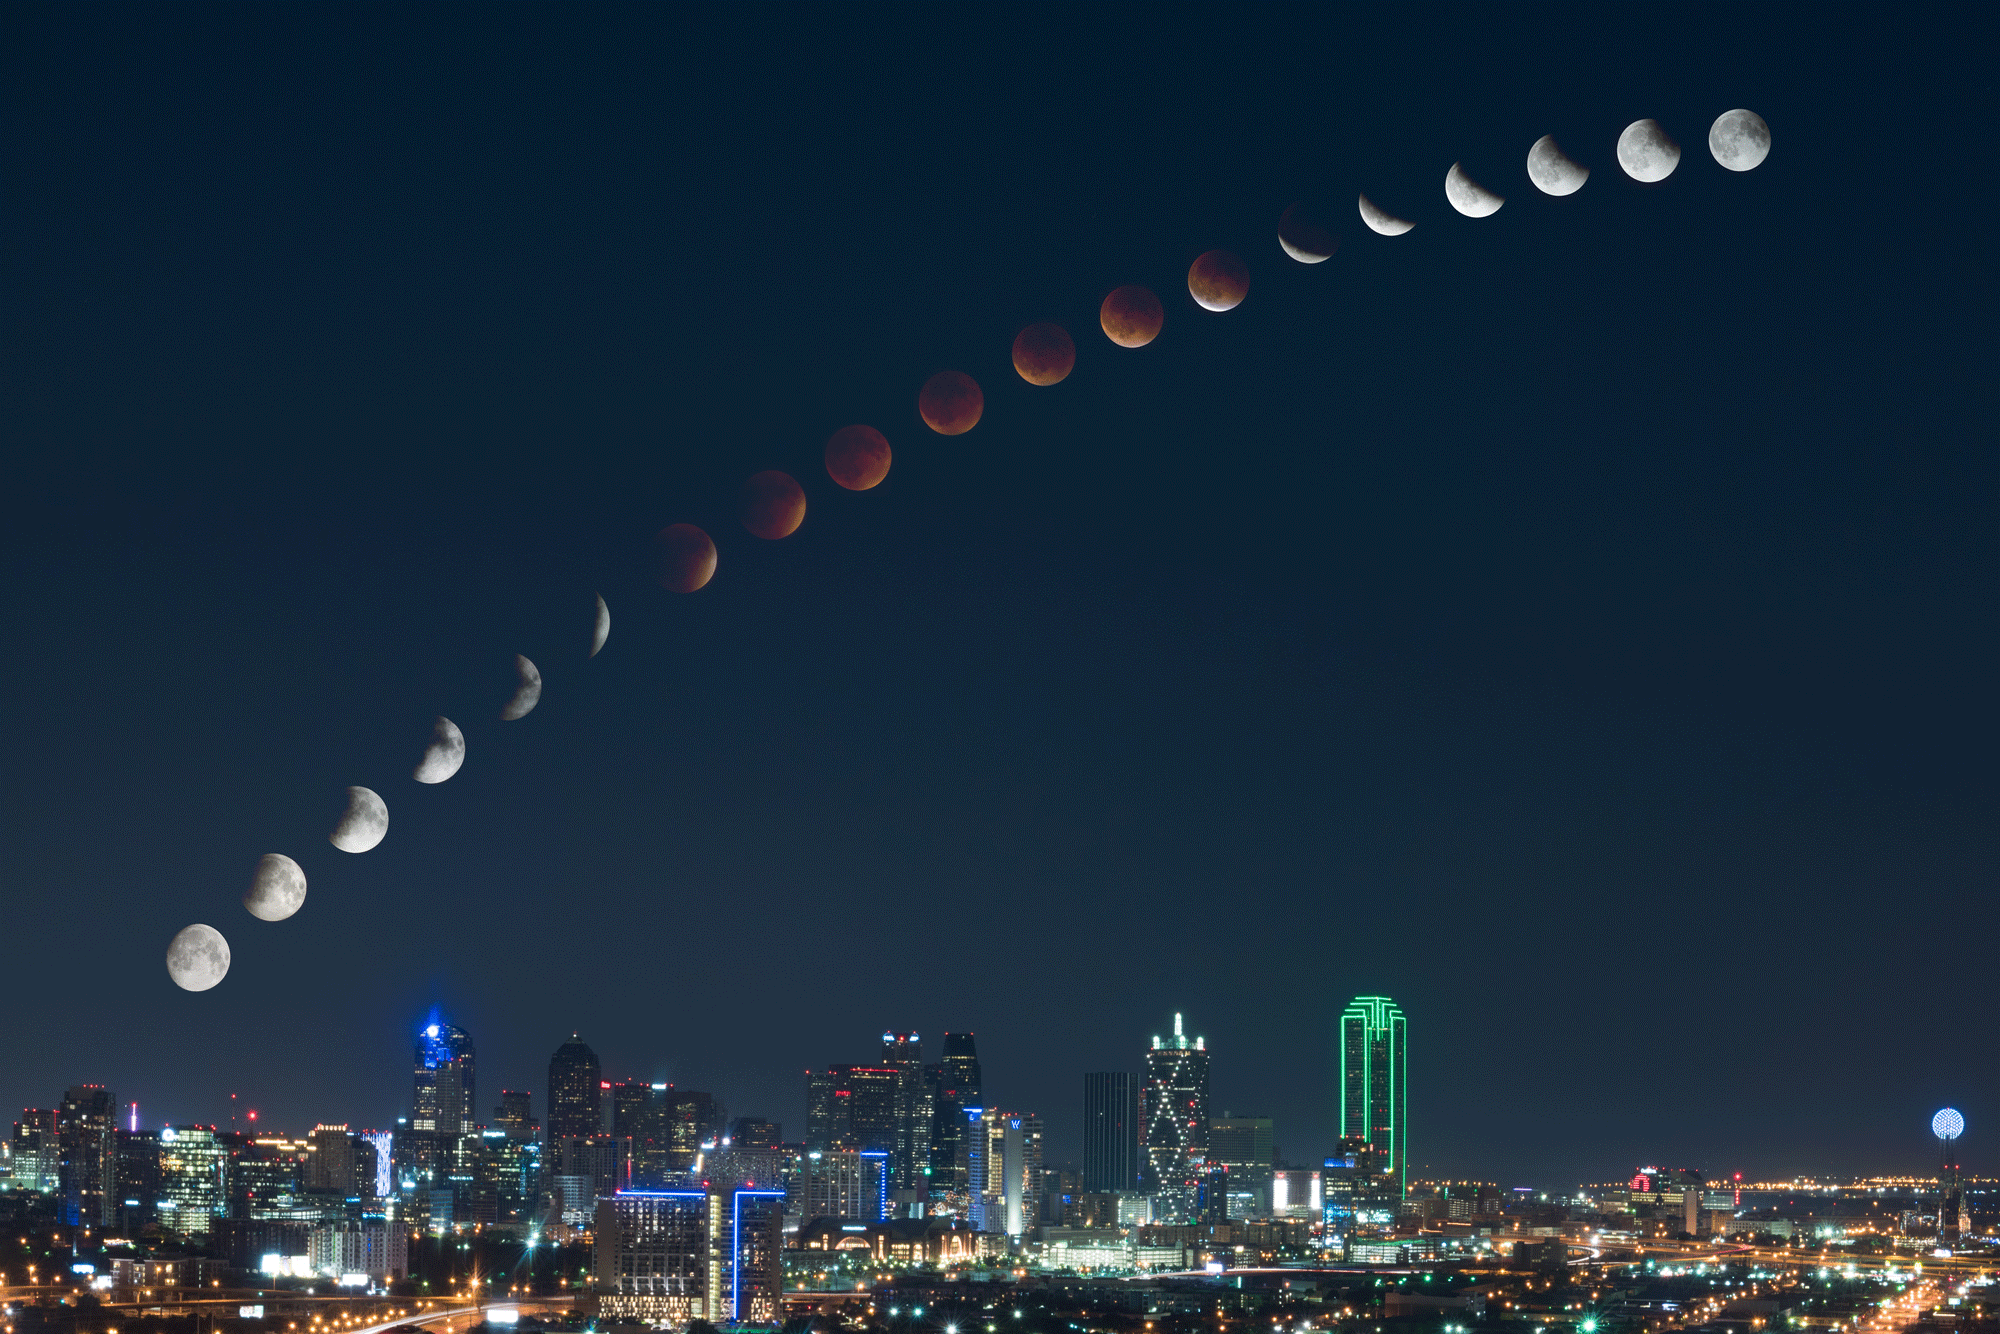 13 Images of the Blood Moon That Aren't Photoshopped to Hell